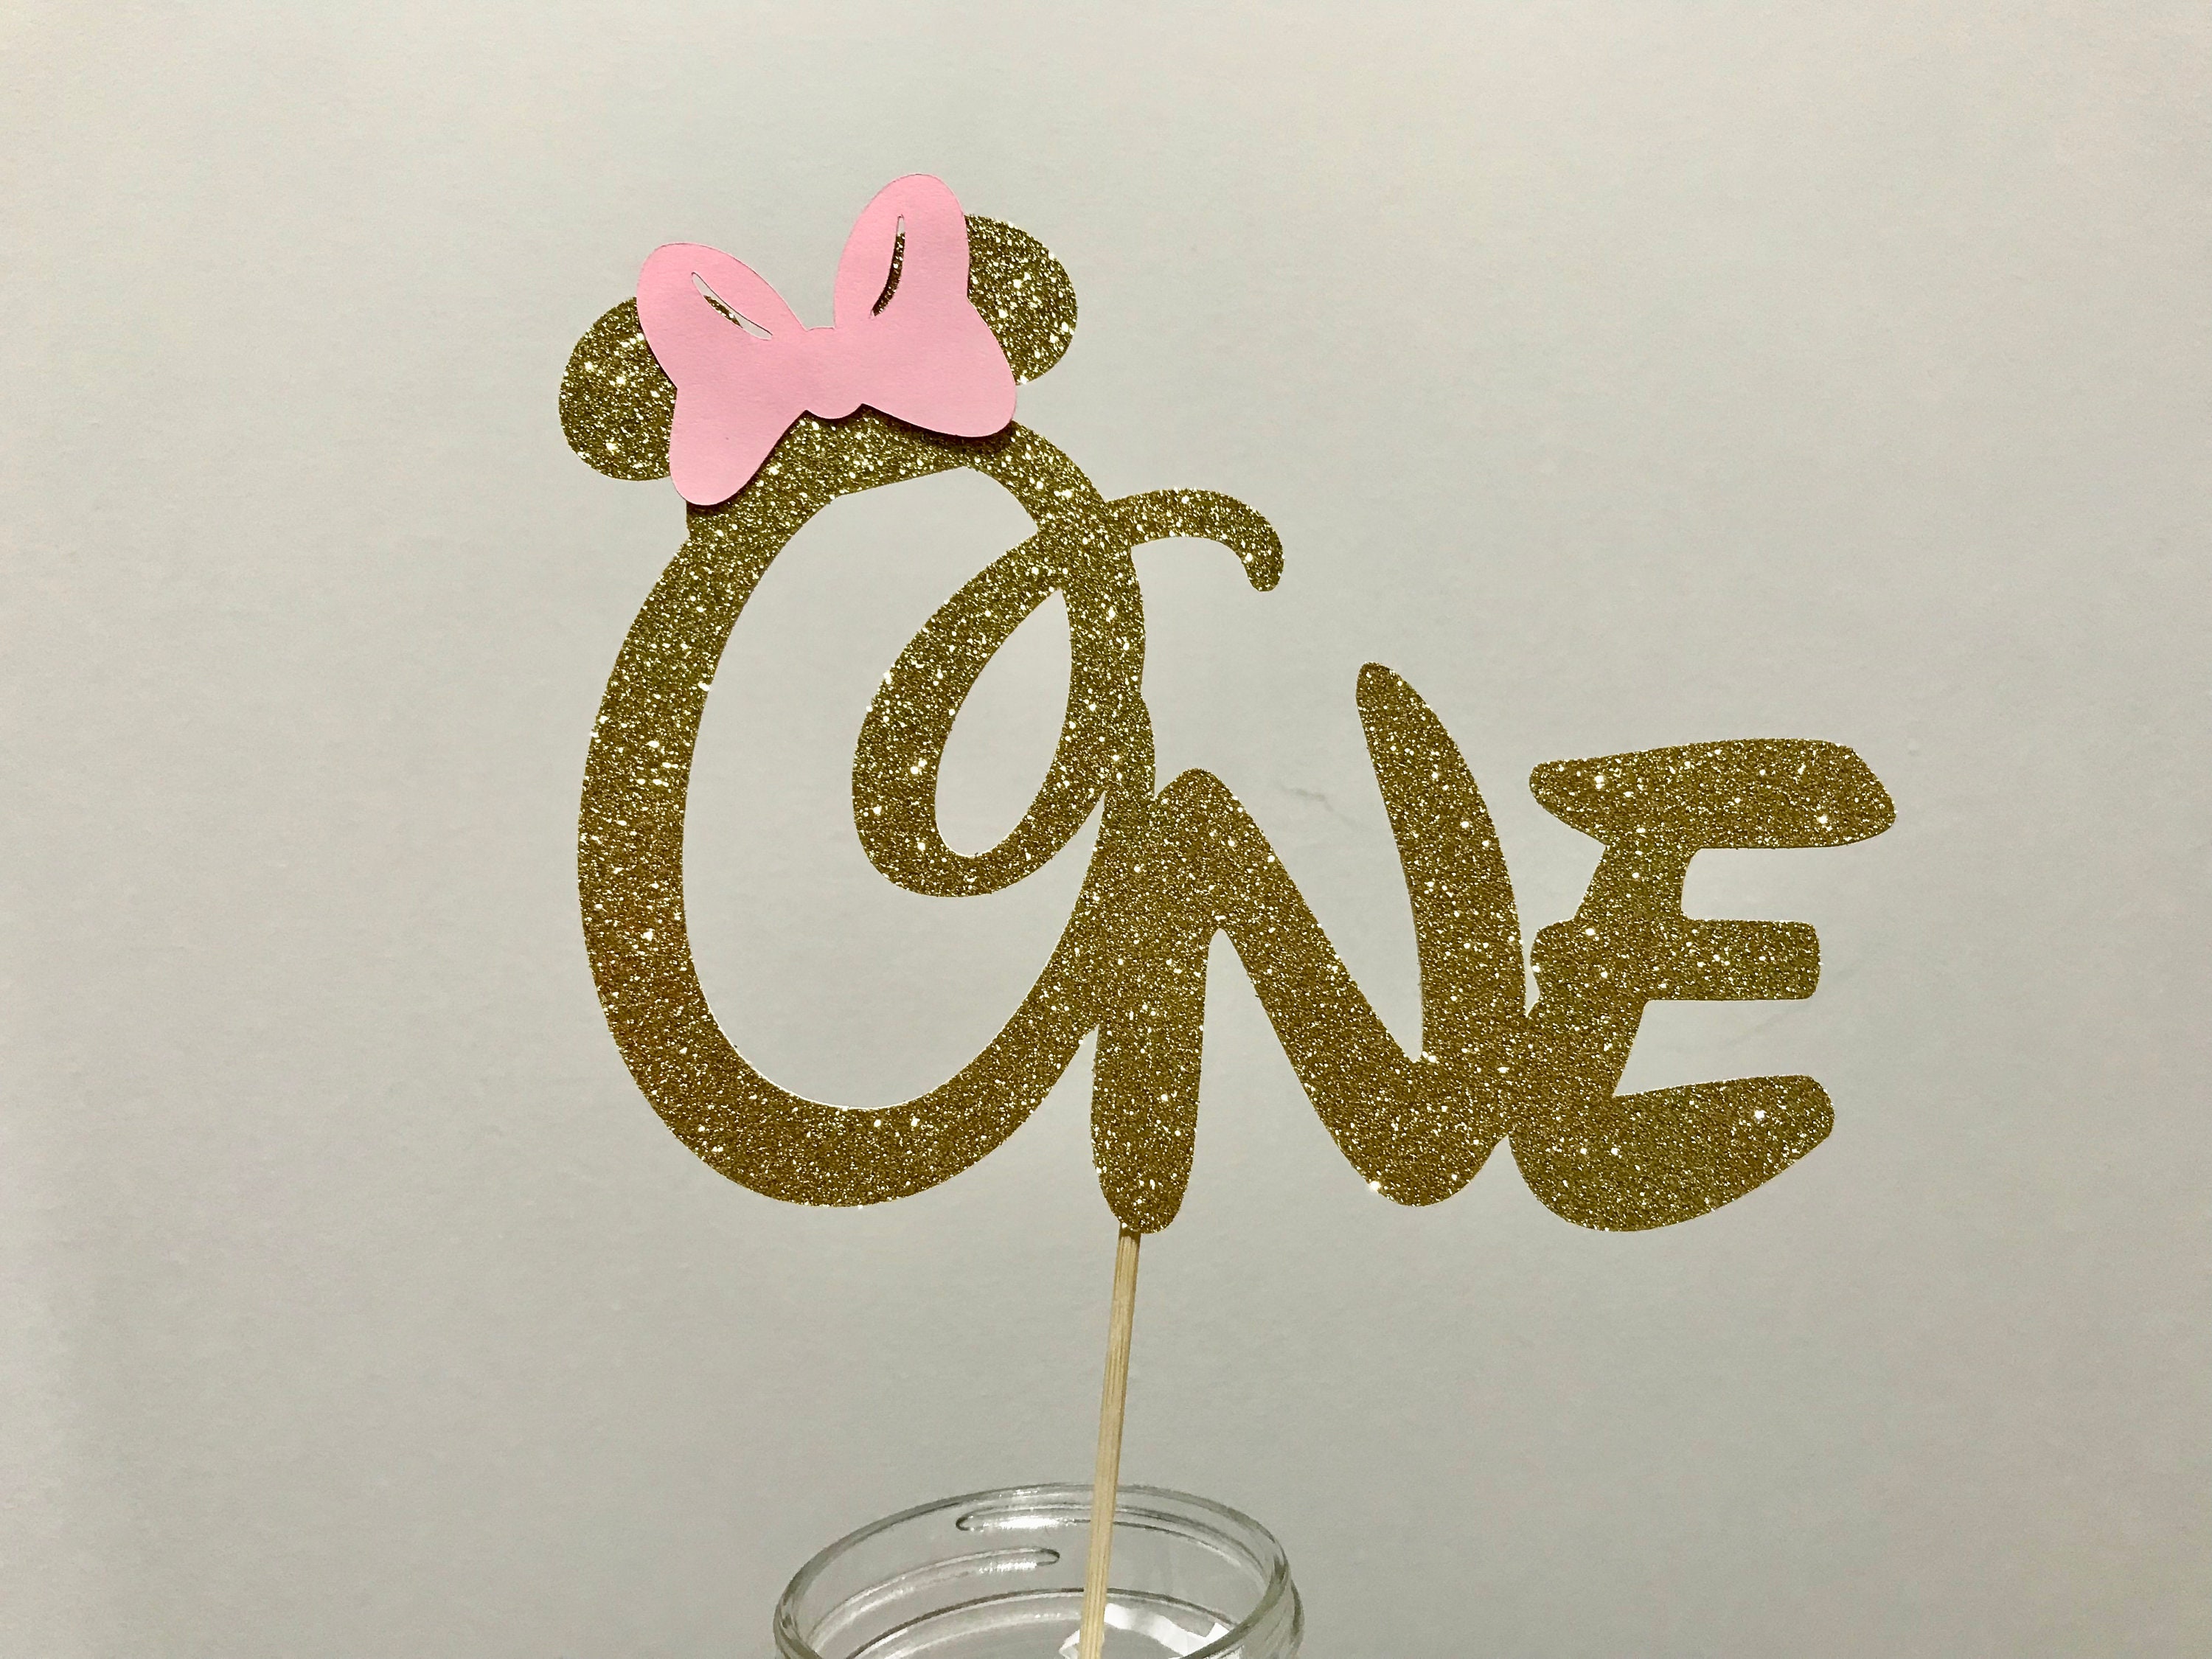 Minnie Mouse Cake Topper, Gold and Pink Glitter Minnie Cake Topper ,First  Birthday Party Cake Stick ,One Minnie Cake Decoration Topper